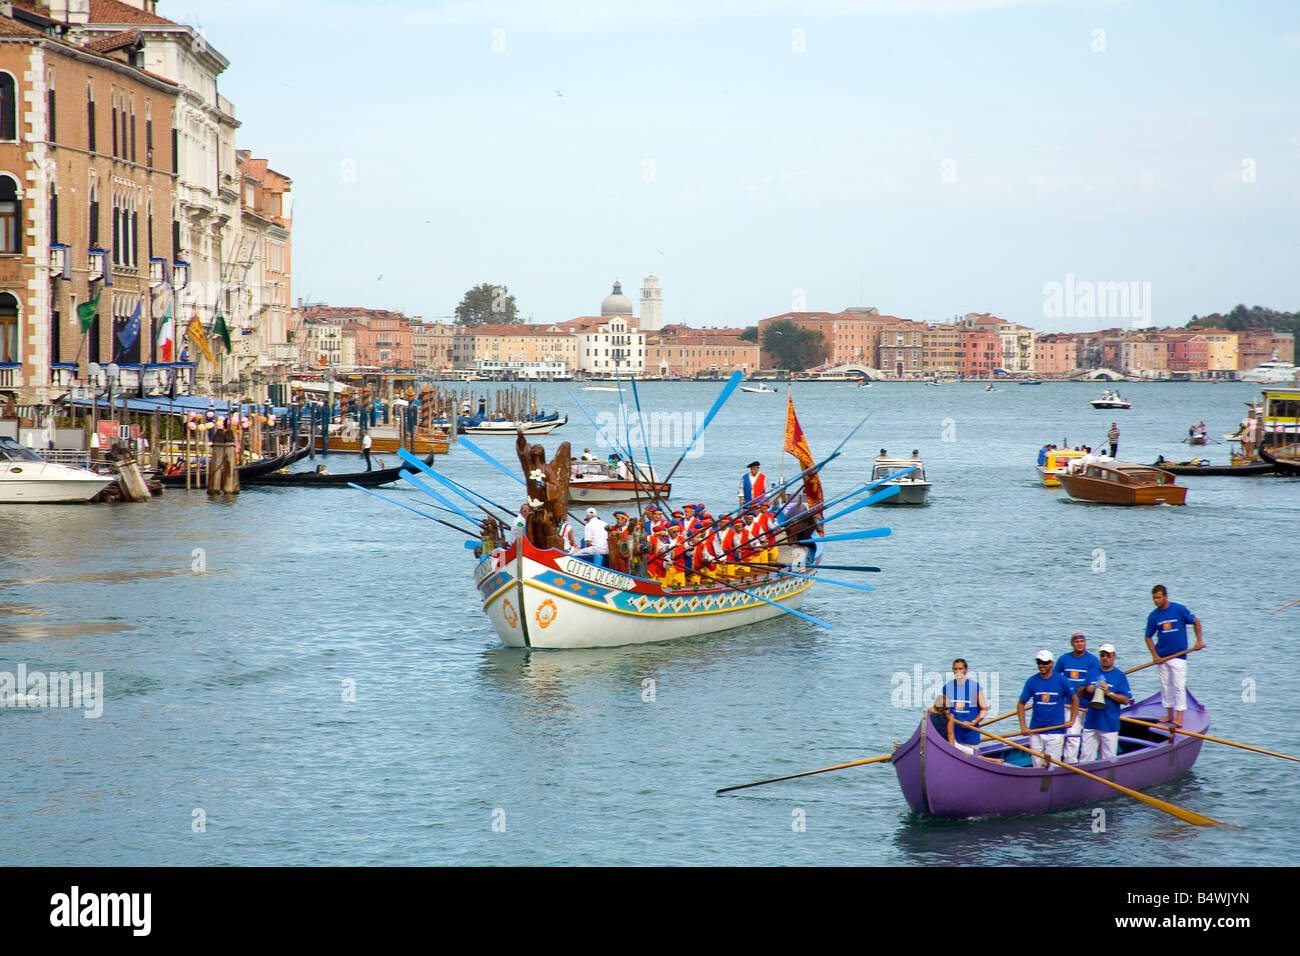 Decorated Boats on the Grand Canal in Venice for the Historical Regatta which takes place each september Stock Photo